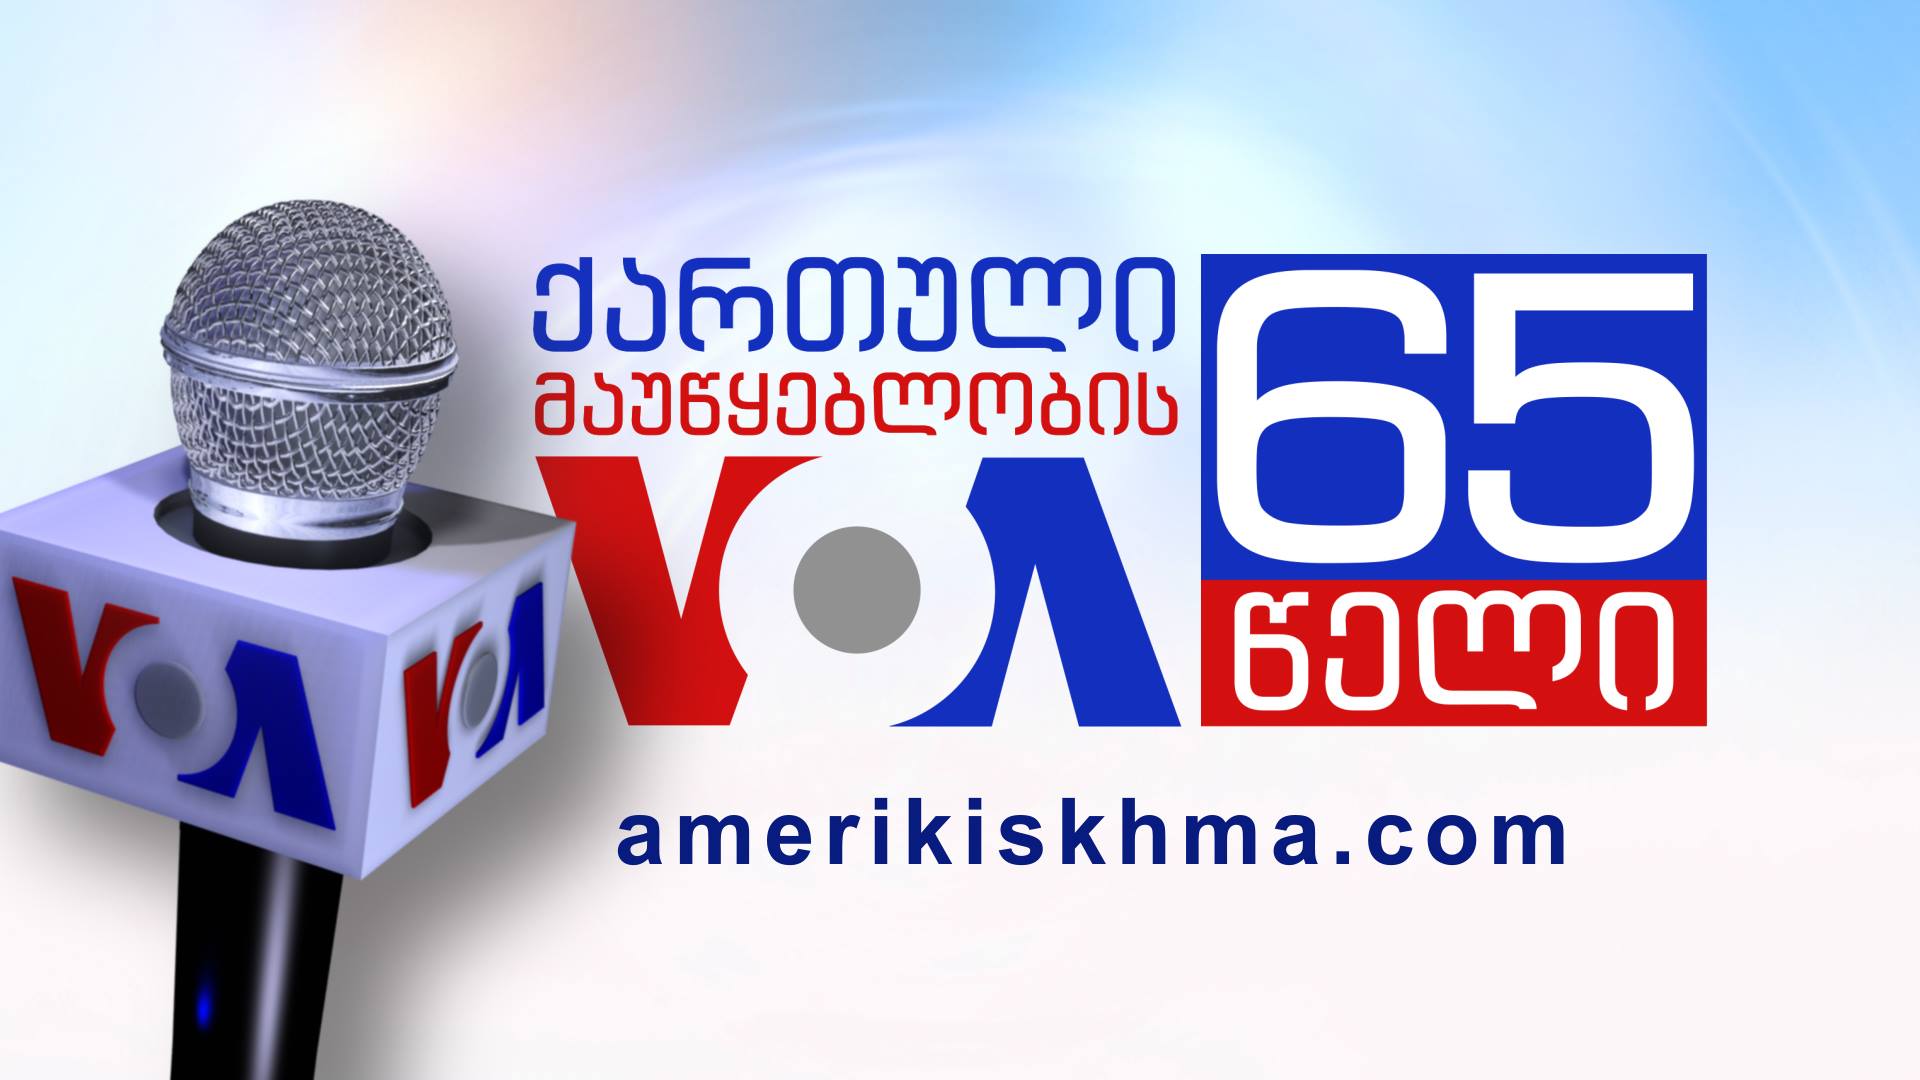 The Georgian Association Congratulates the Georgian Service of the Voice of America on its 65th anniversary